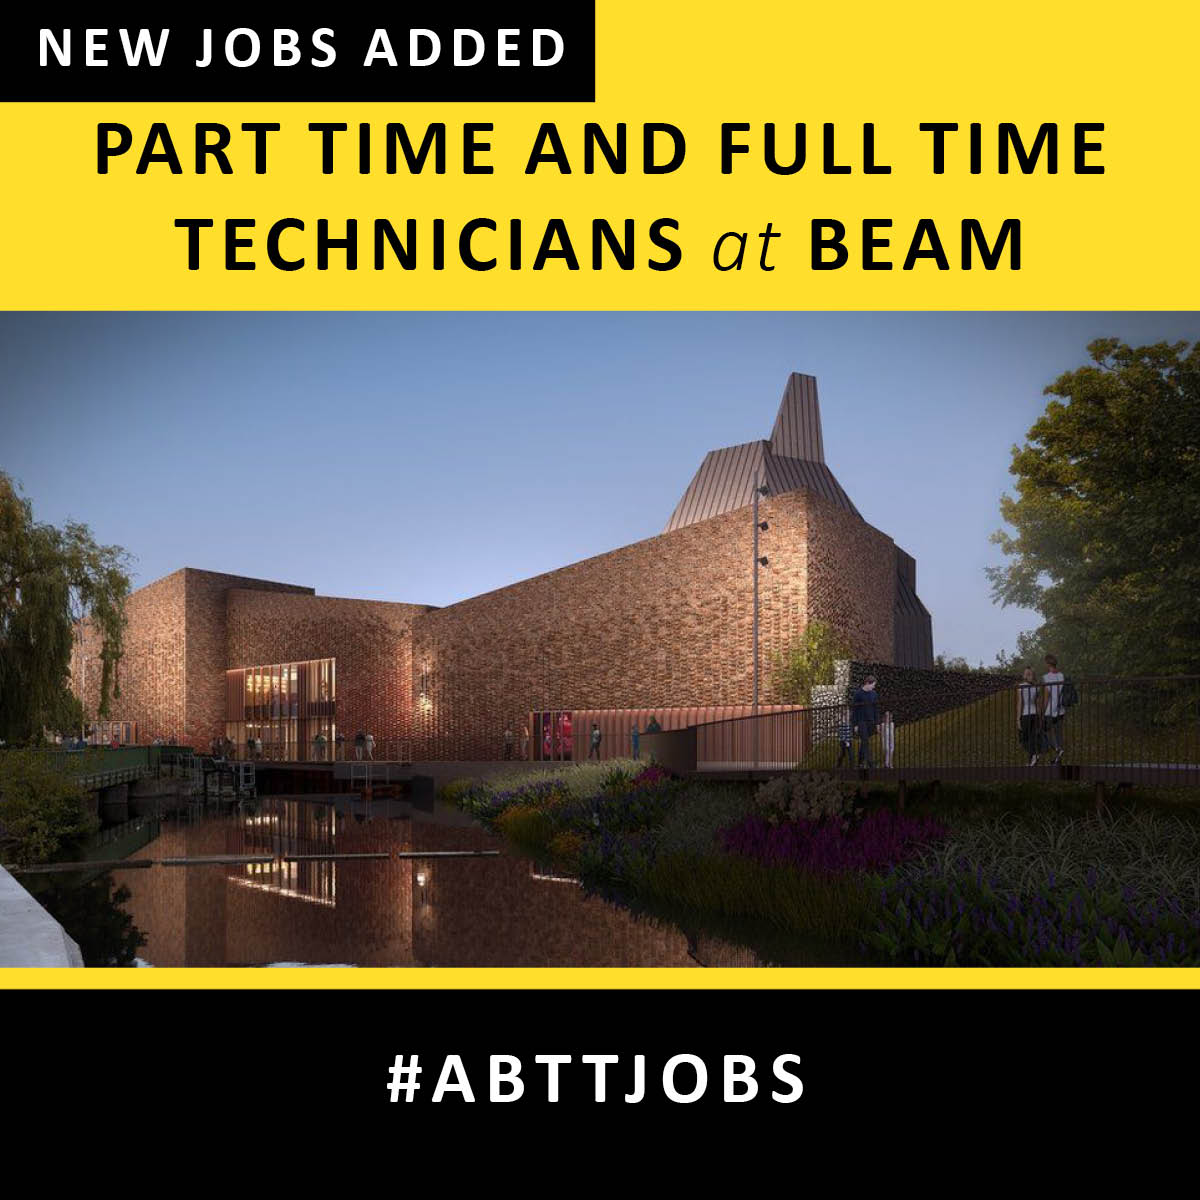 BEAM (formerly Hertford Theatre) are currently recruiting part time and full time technicians to help relaunch their building after a 4-year hiatus and a £30m redevelopment.

Part time Technician: abtt.org.uk/jobs/technicia…
Full time Technician: abtt.org.uk/jobs/technicia…

#ABTTjobs